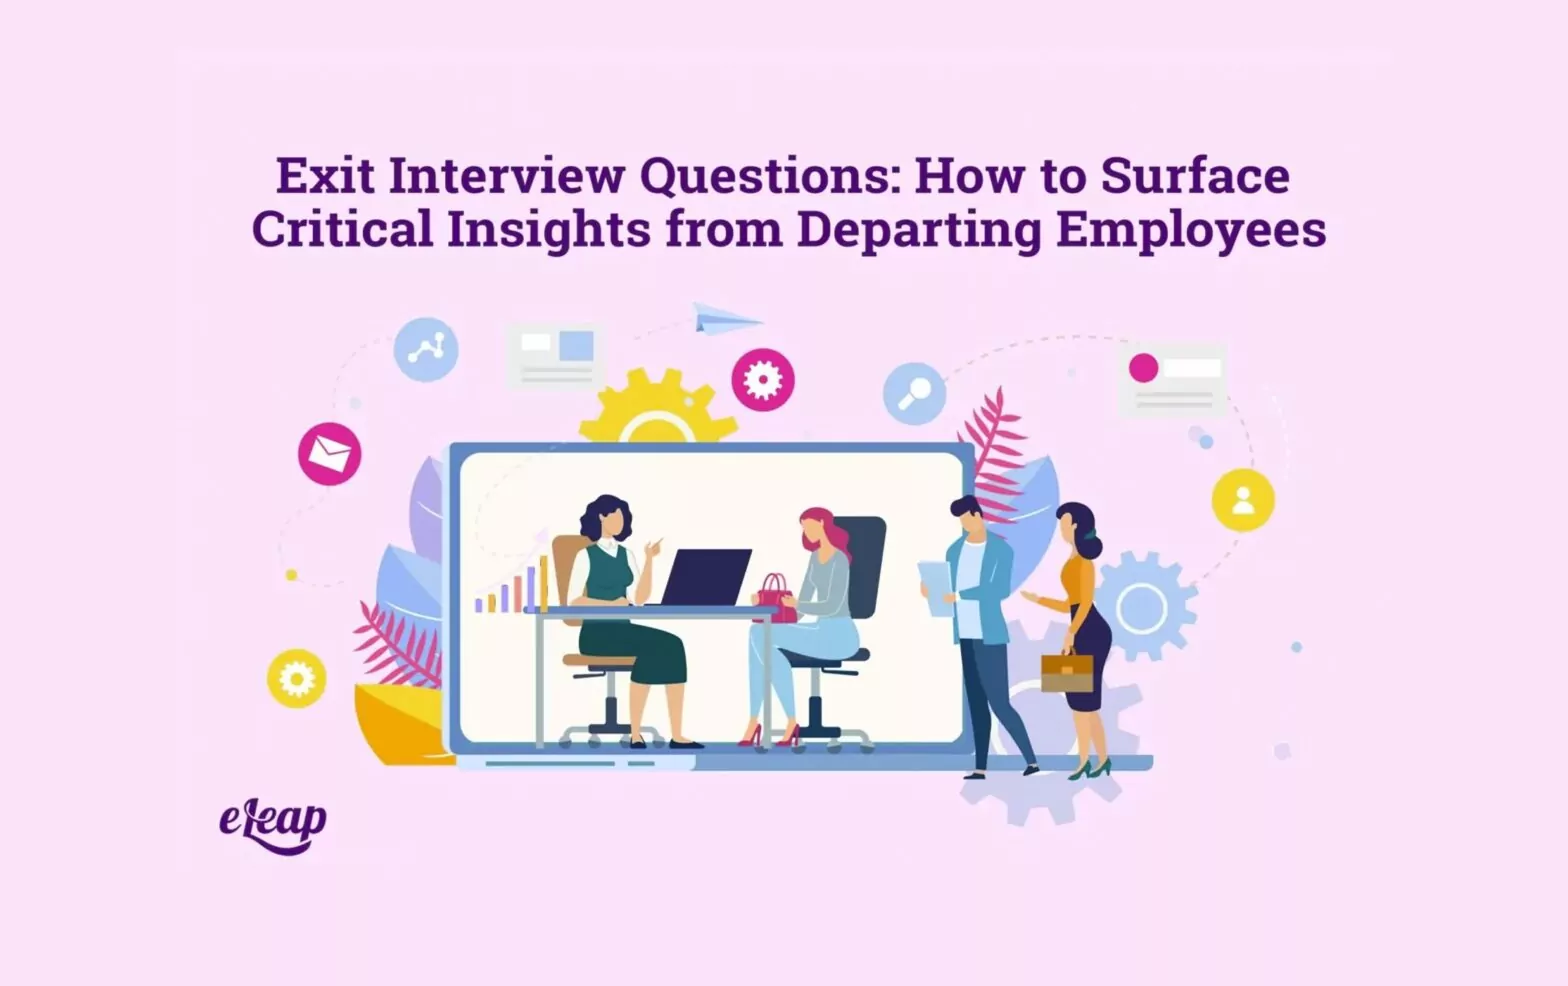 Exit Interview Questions: How to Surface Critical Insights from Departing Employees